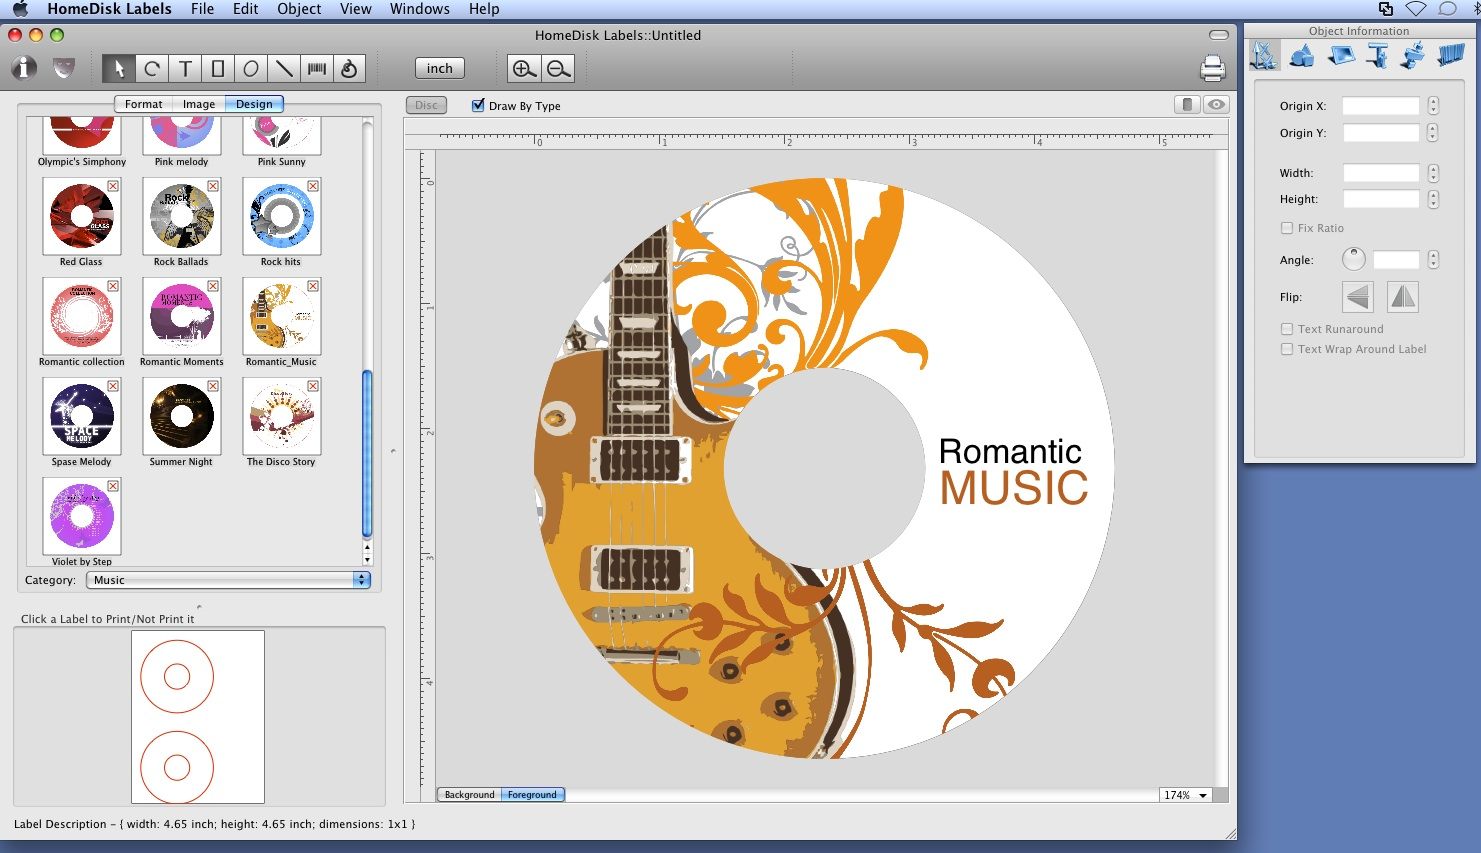 Free Neato Cd Label Software For Mac - potentfestival Regarding Neato By Fellowes Cd Label Template